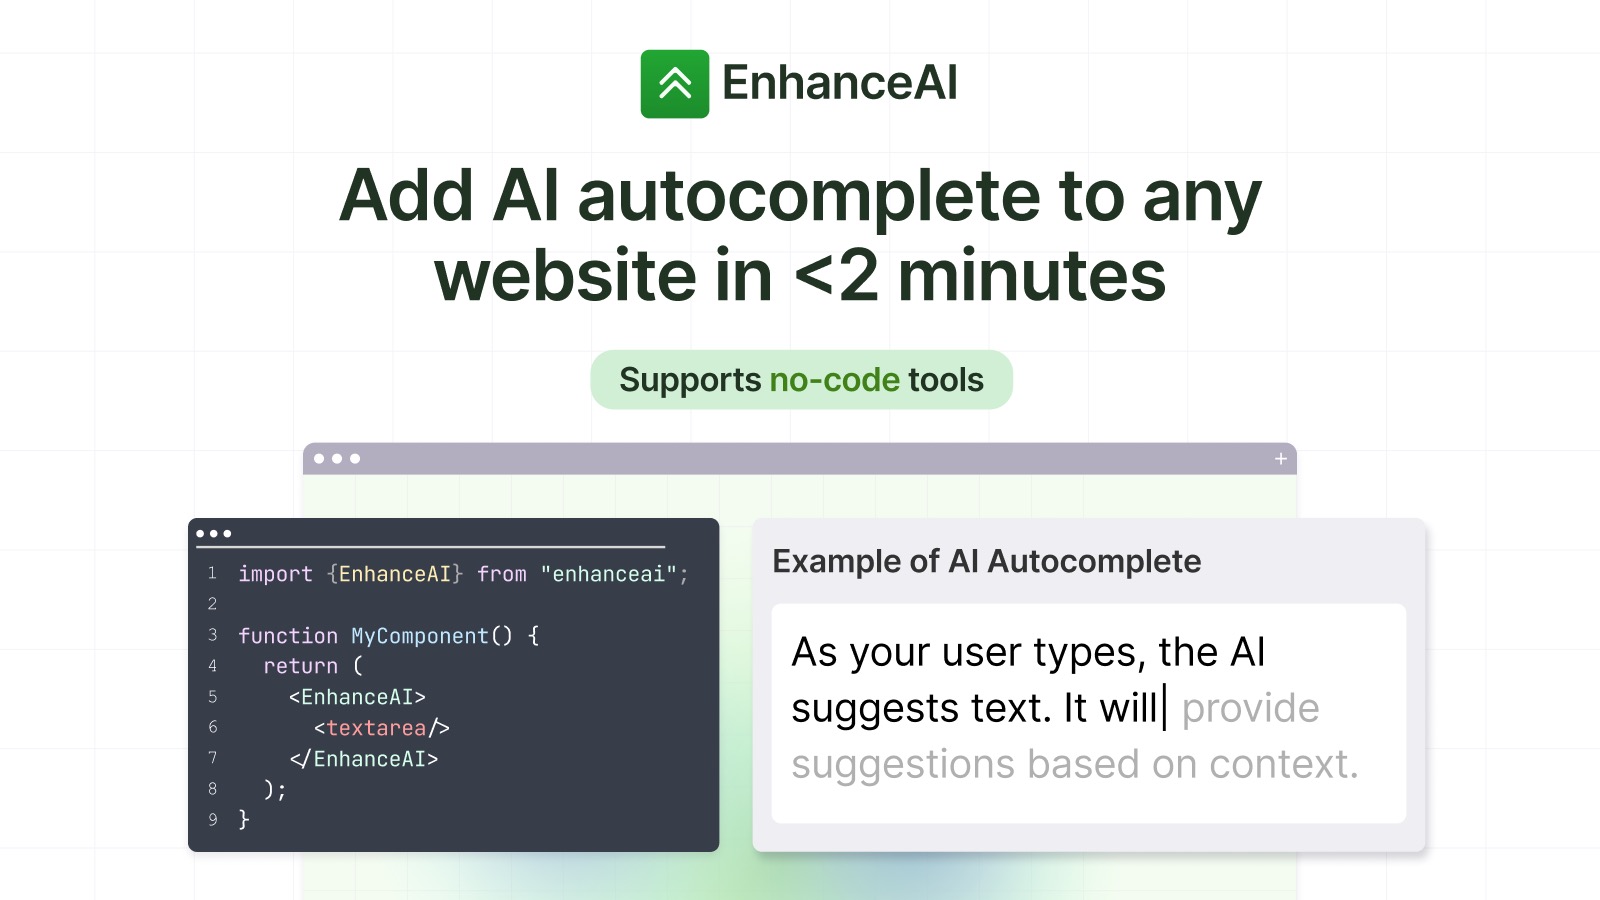 EnhanceAI - A tool to add autocomplete capability to websites